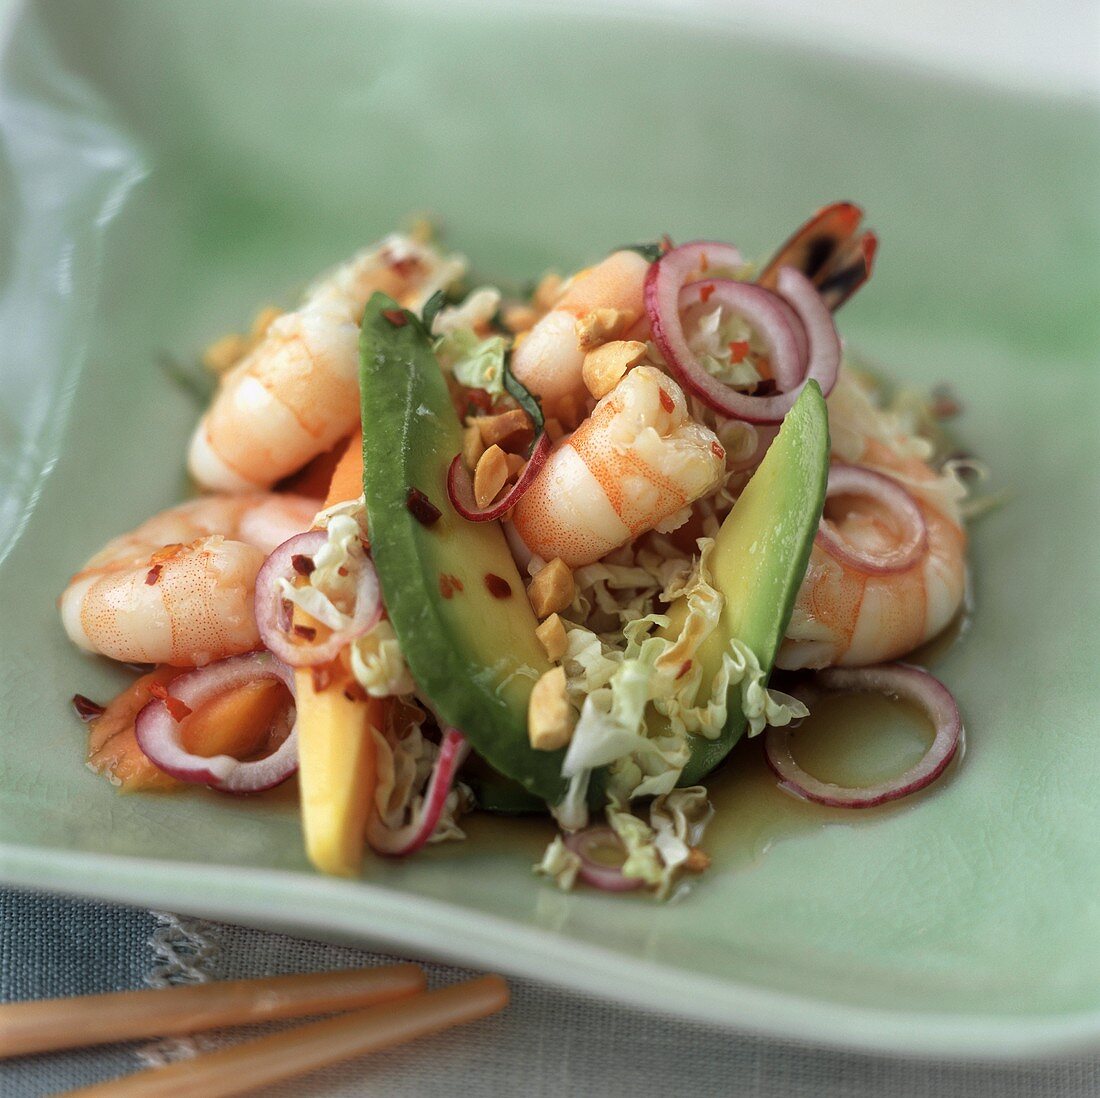 Shrimp and avocado salad with peanuts and red onions